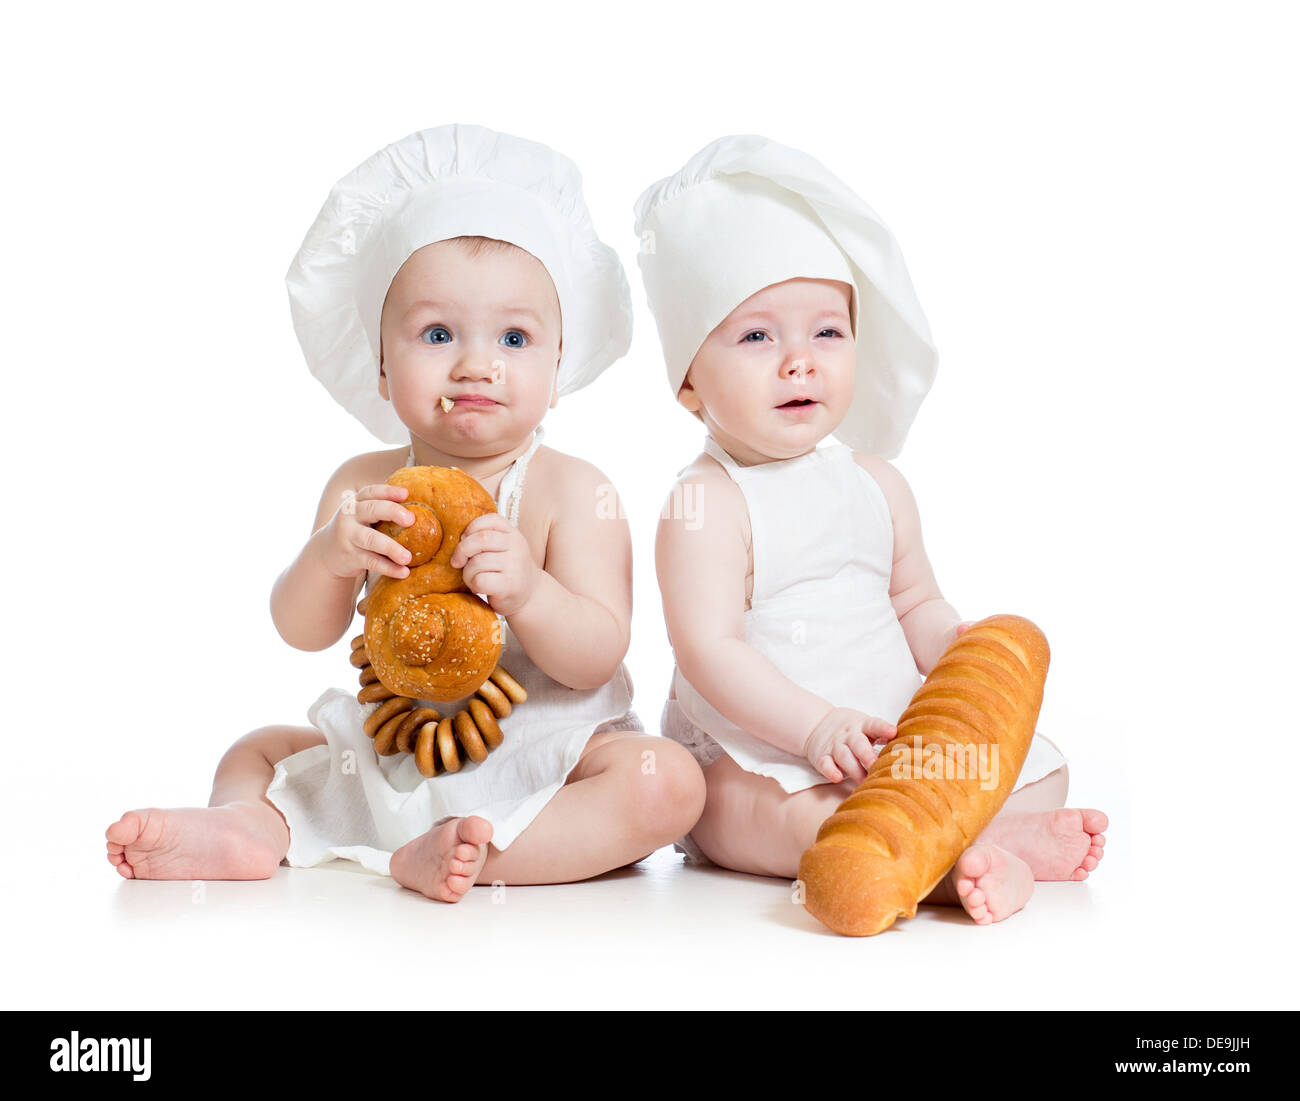 funny bakers babies boy and girl Stock Photo